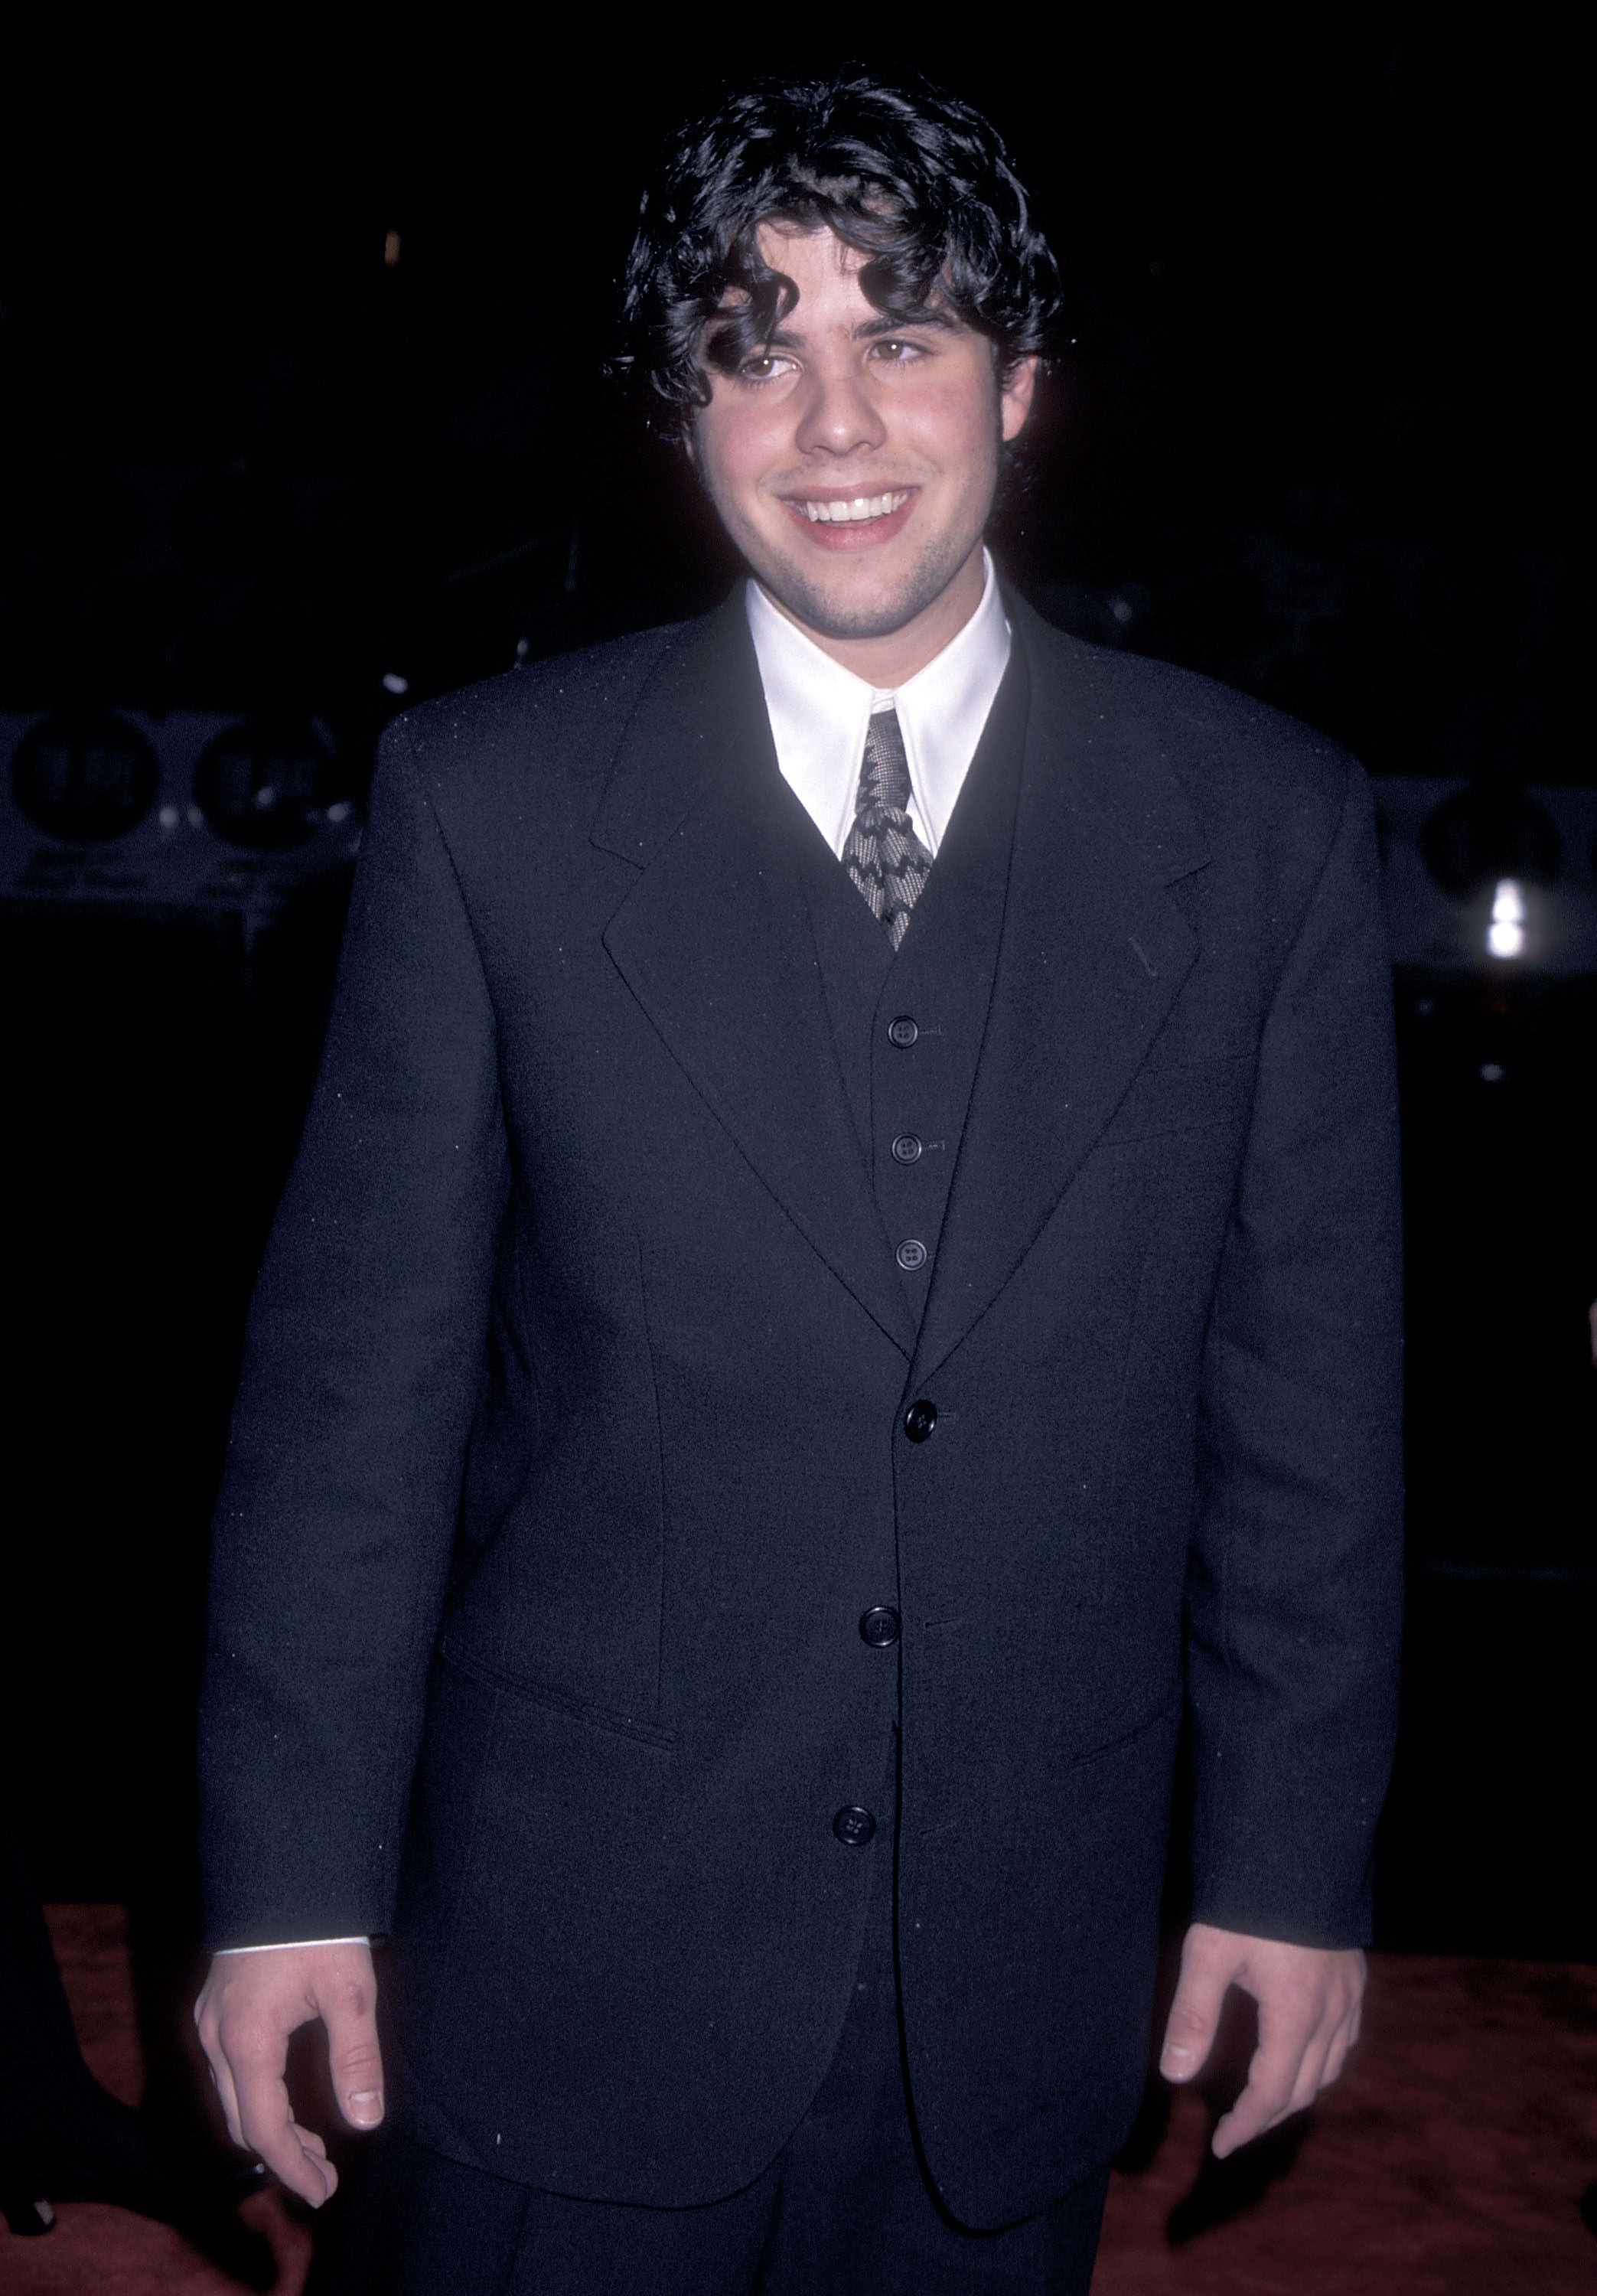 Sage Stallone at the "Daylight" Hollywood premiere in Hollywood, California on December 5, 1996. | Source: Getty Images